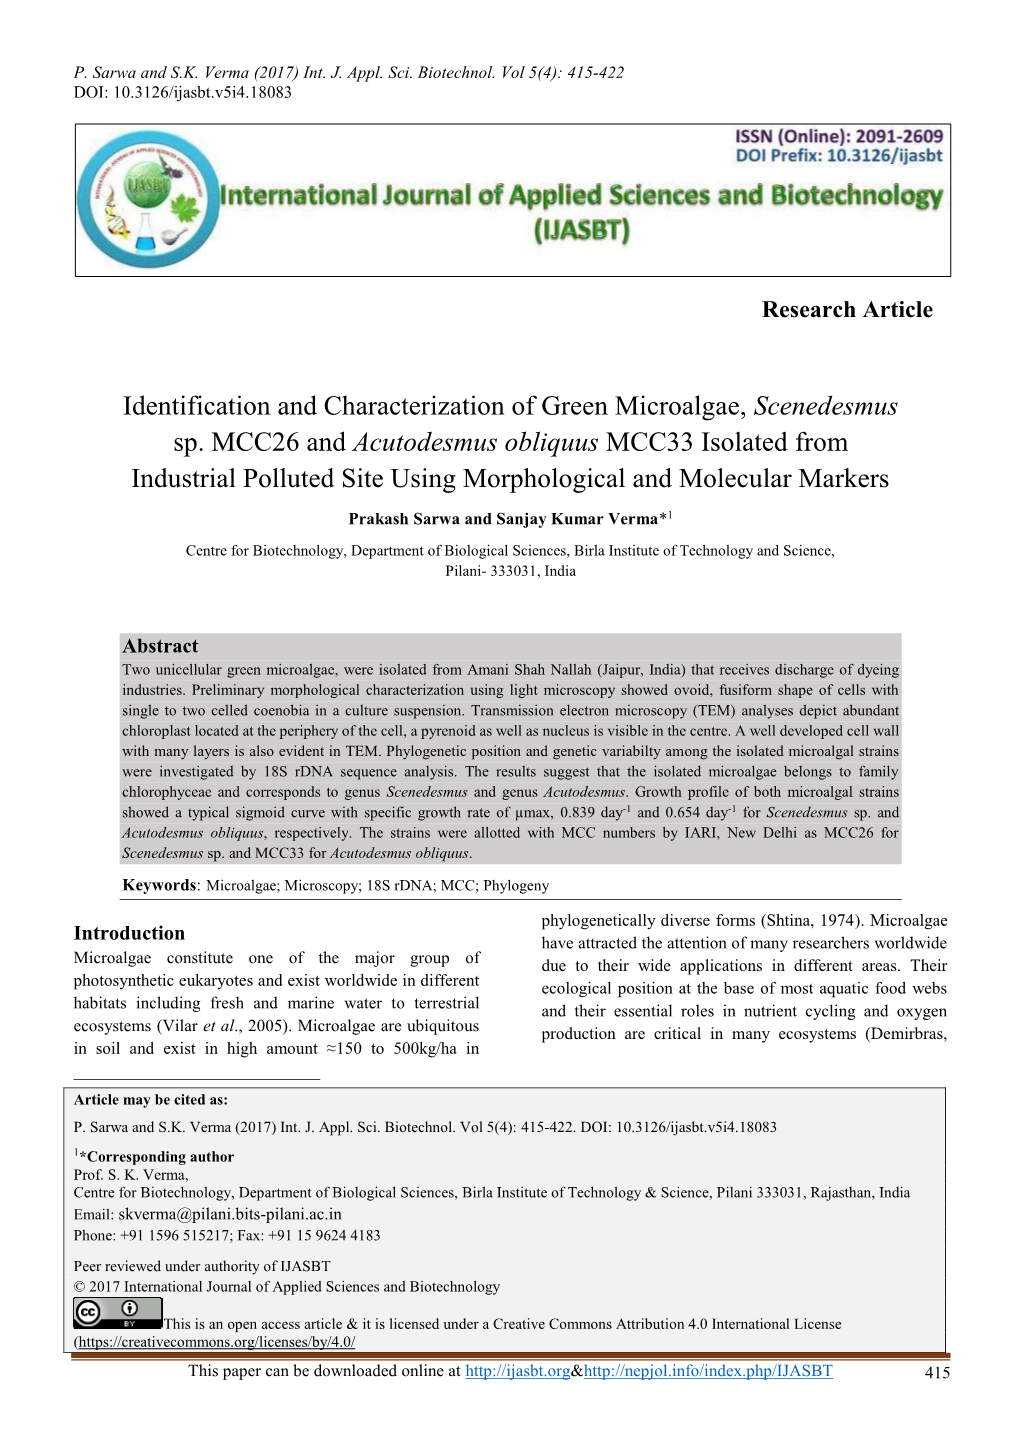 Identification and Characterization of Green Microalgae, Scenedesmus Sp. MCC26 and Acutodesmus Obliquus MCC33 Isolated from Indu